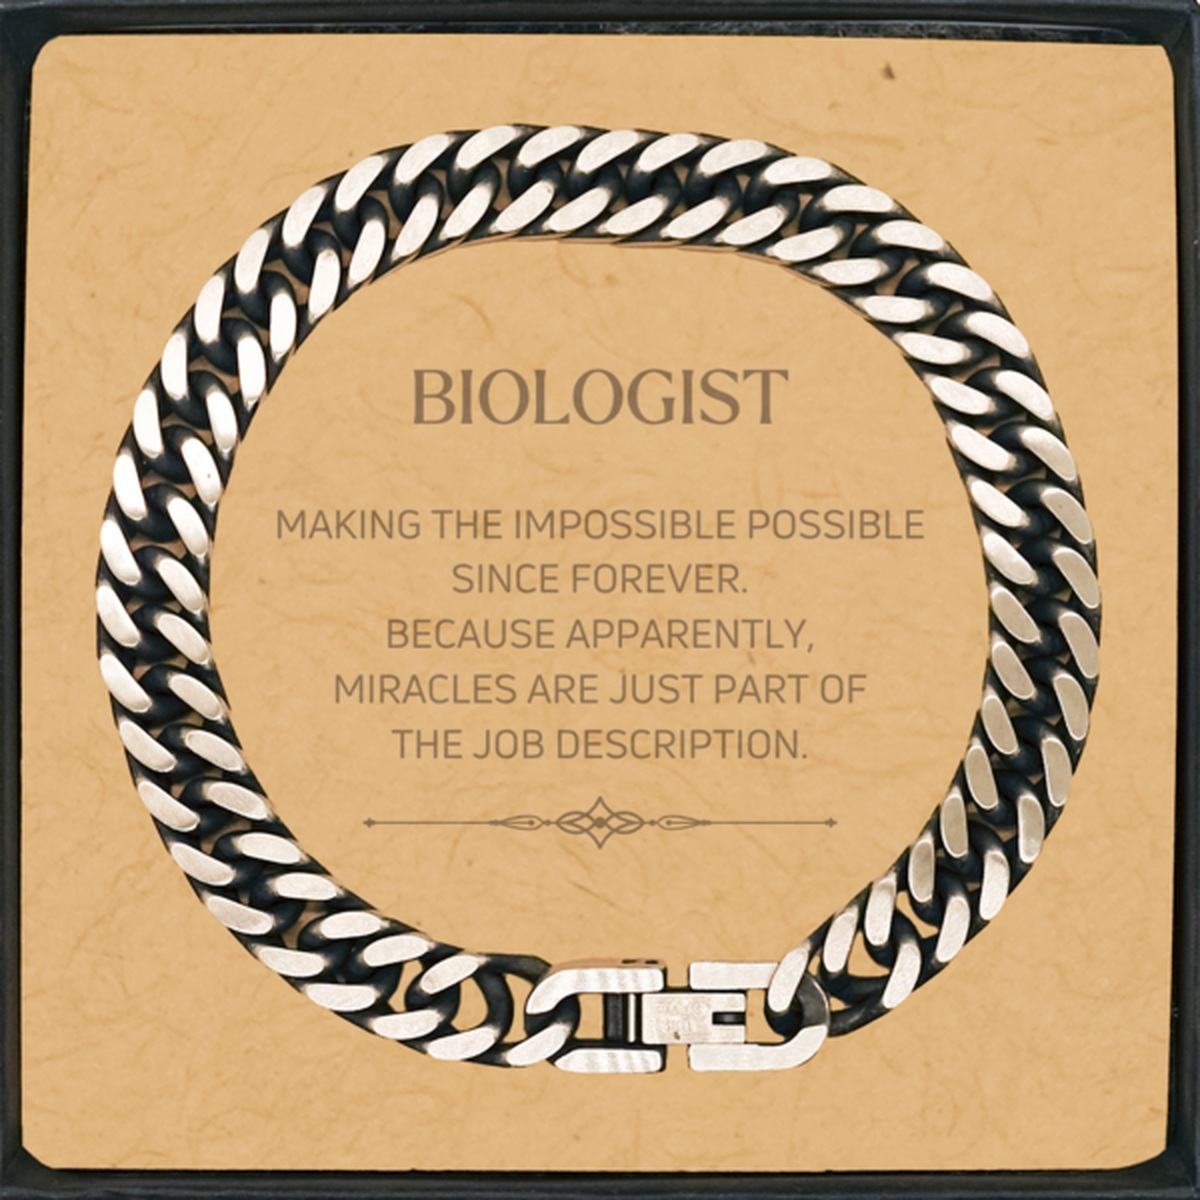 Funny Biologist Gifts, Miracles are just part of the job description, Inspirational Birthday Cuban Link Chain Bracelet For Biologist, Men, Women, Coworkers, Friends, Boss